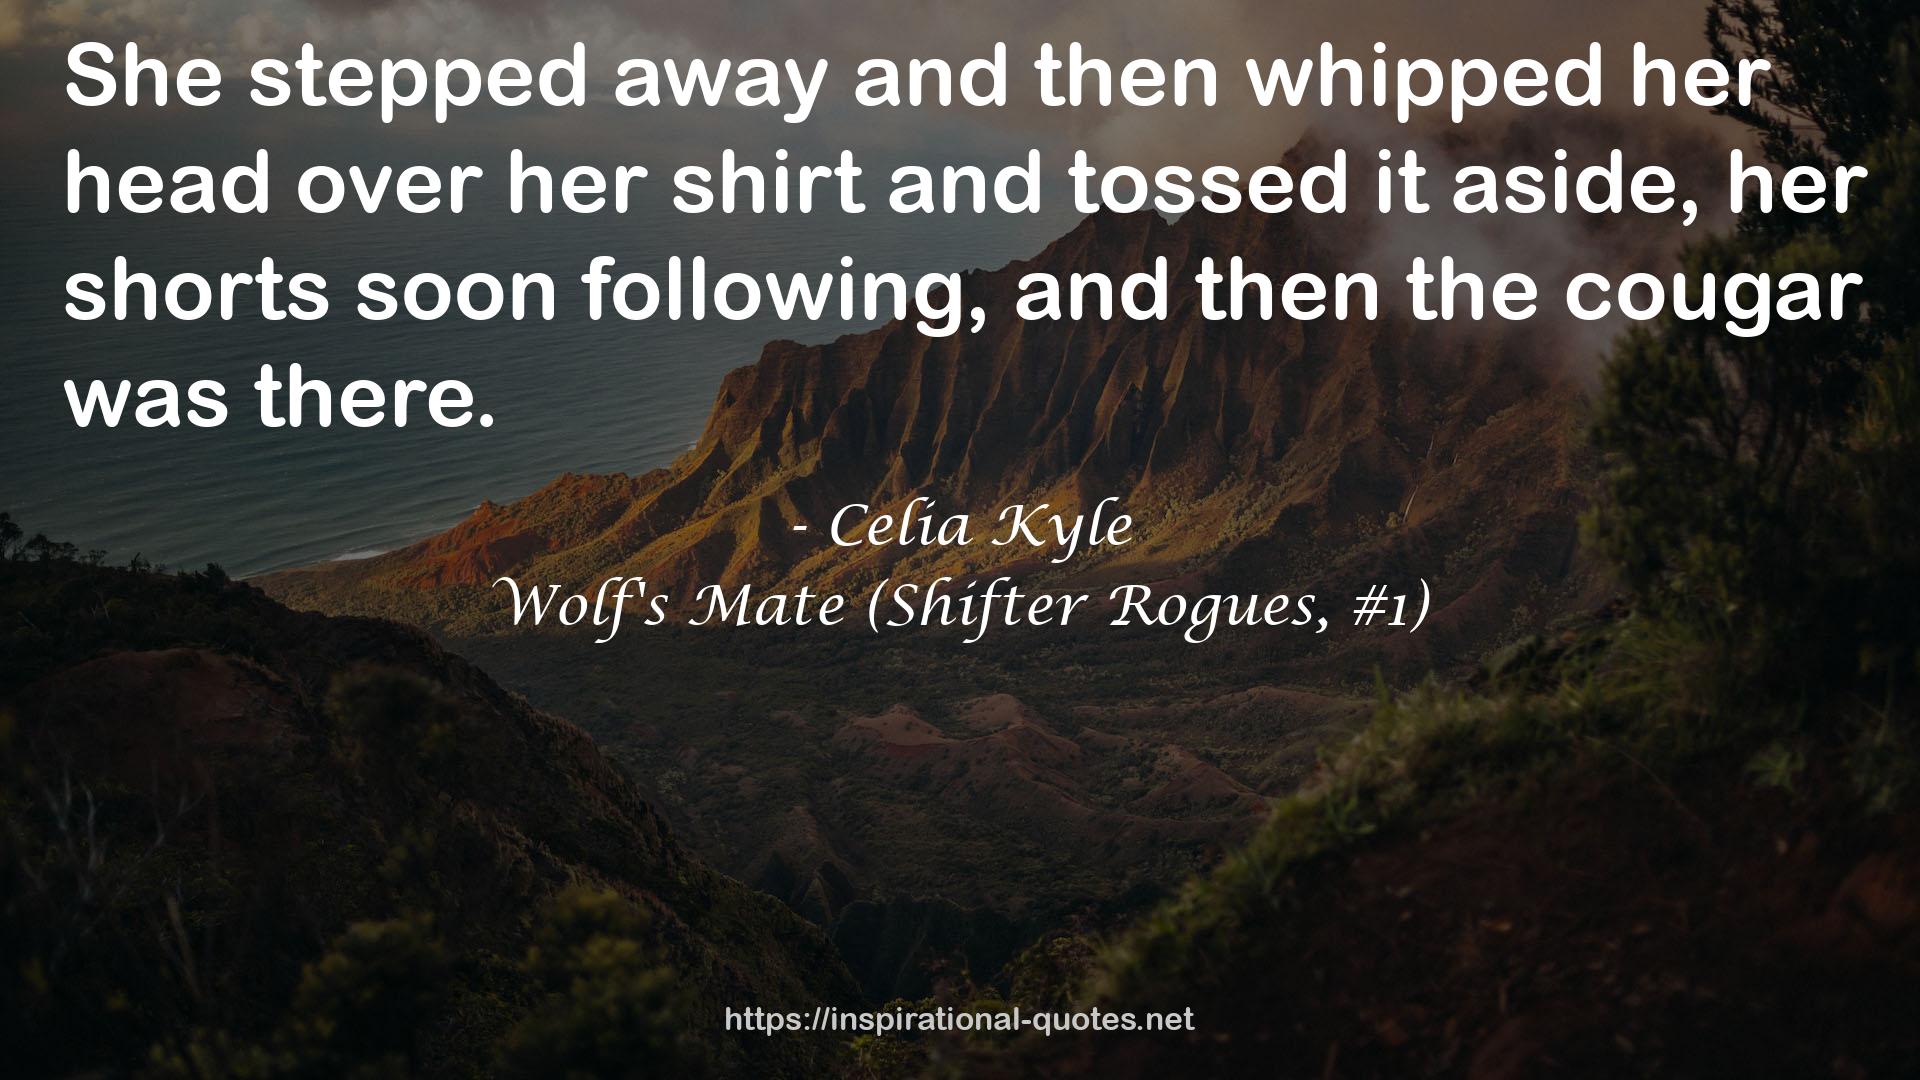 Wolf's Mate (Shifter Rogues, #1) QUOTES